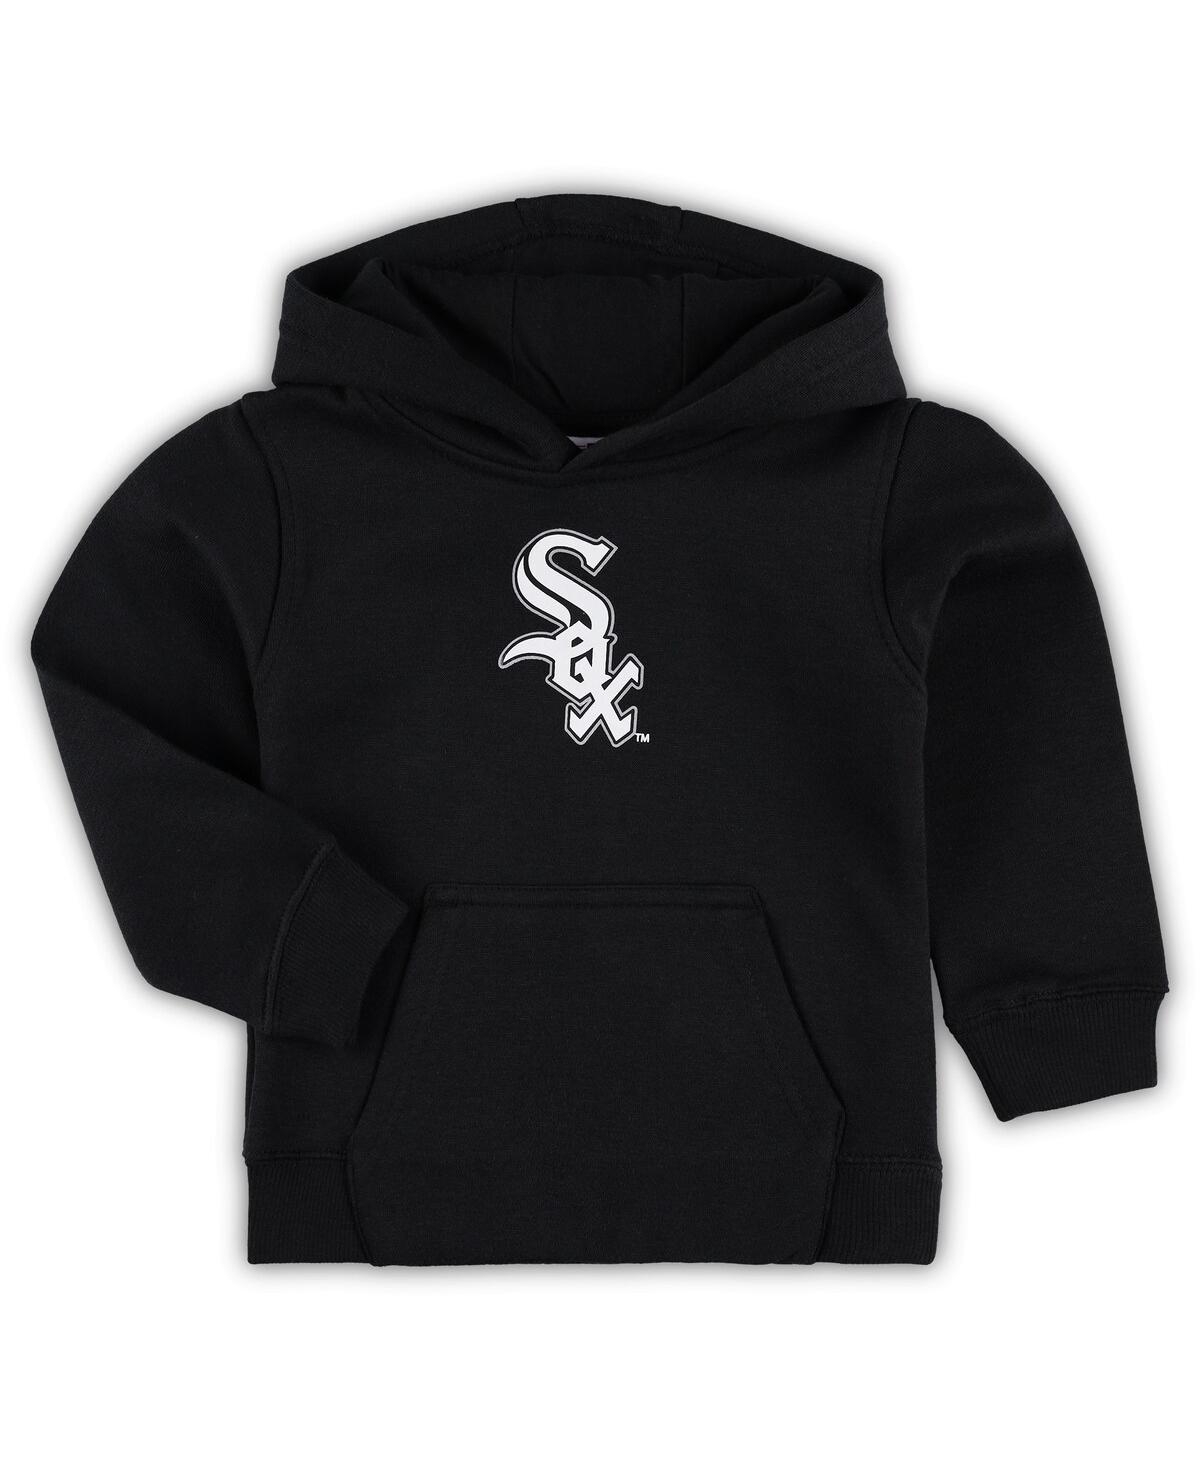 Outerstuff Babies' Toddler Boys And Girls Black Chicago White Sox Team Primary Logo Fleece Pullover Hoodie